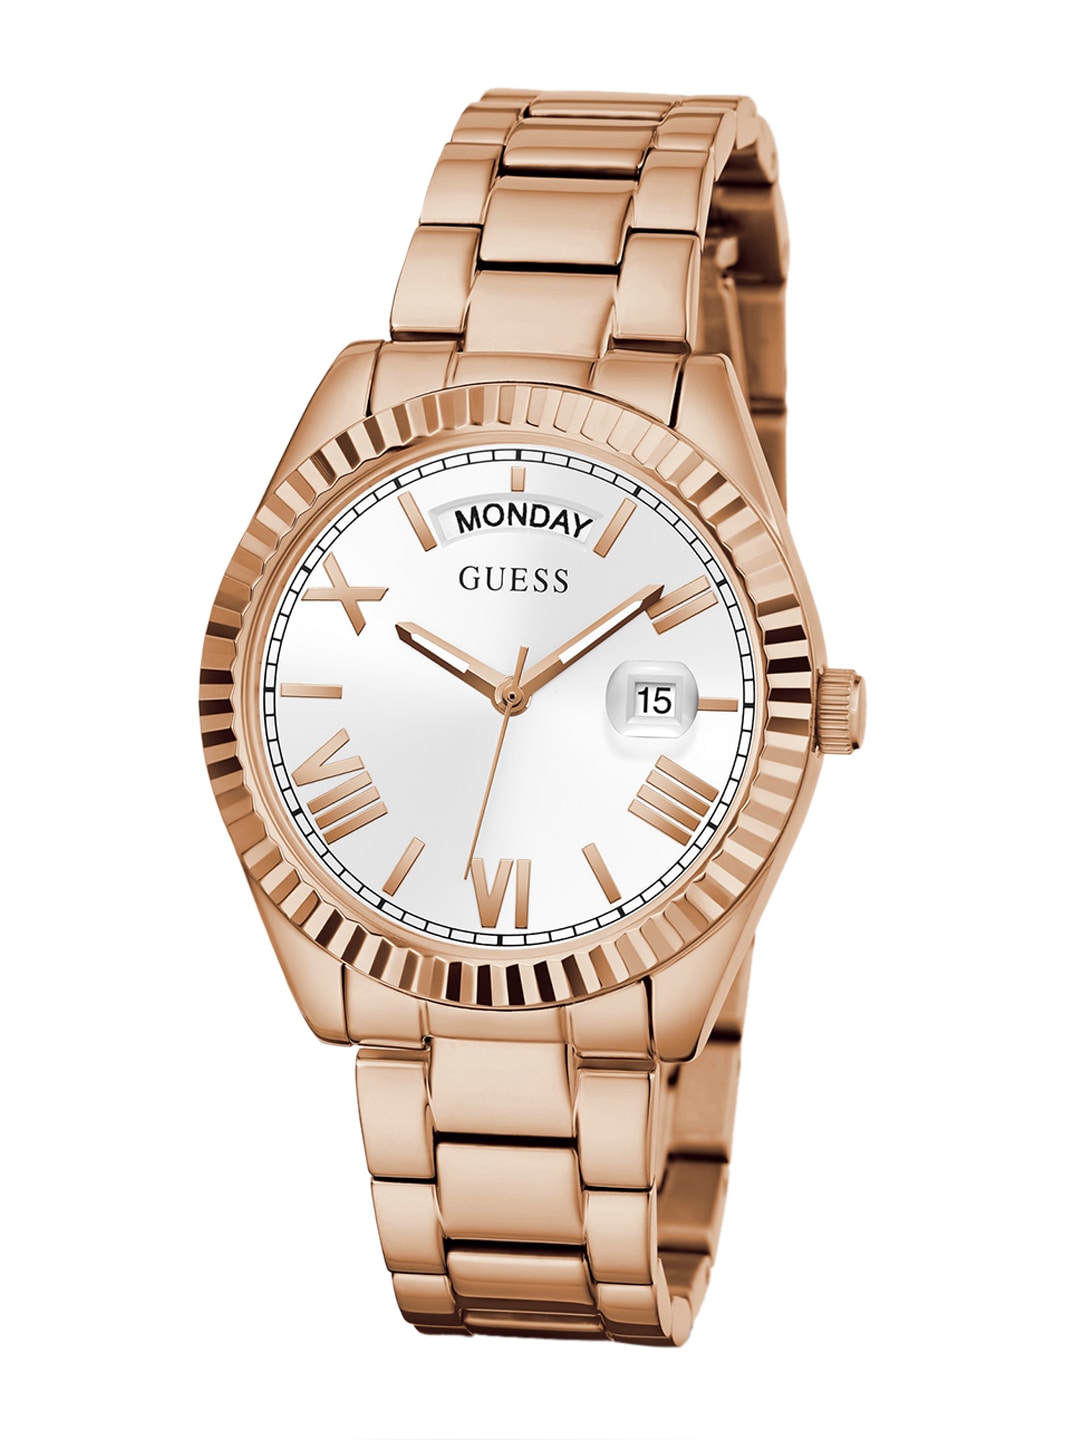 GUESS Women White Solid Dial & Rose Gold Toned Straps Analogue Watch GW0308L3 Price in India